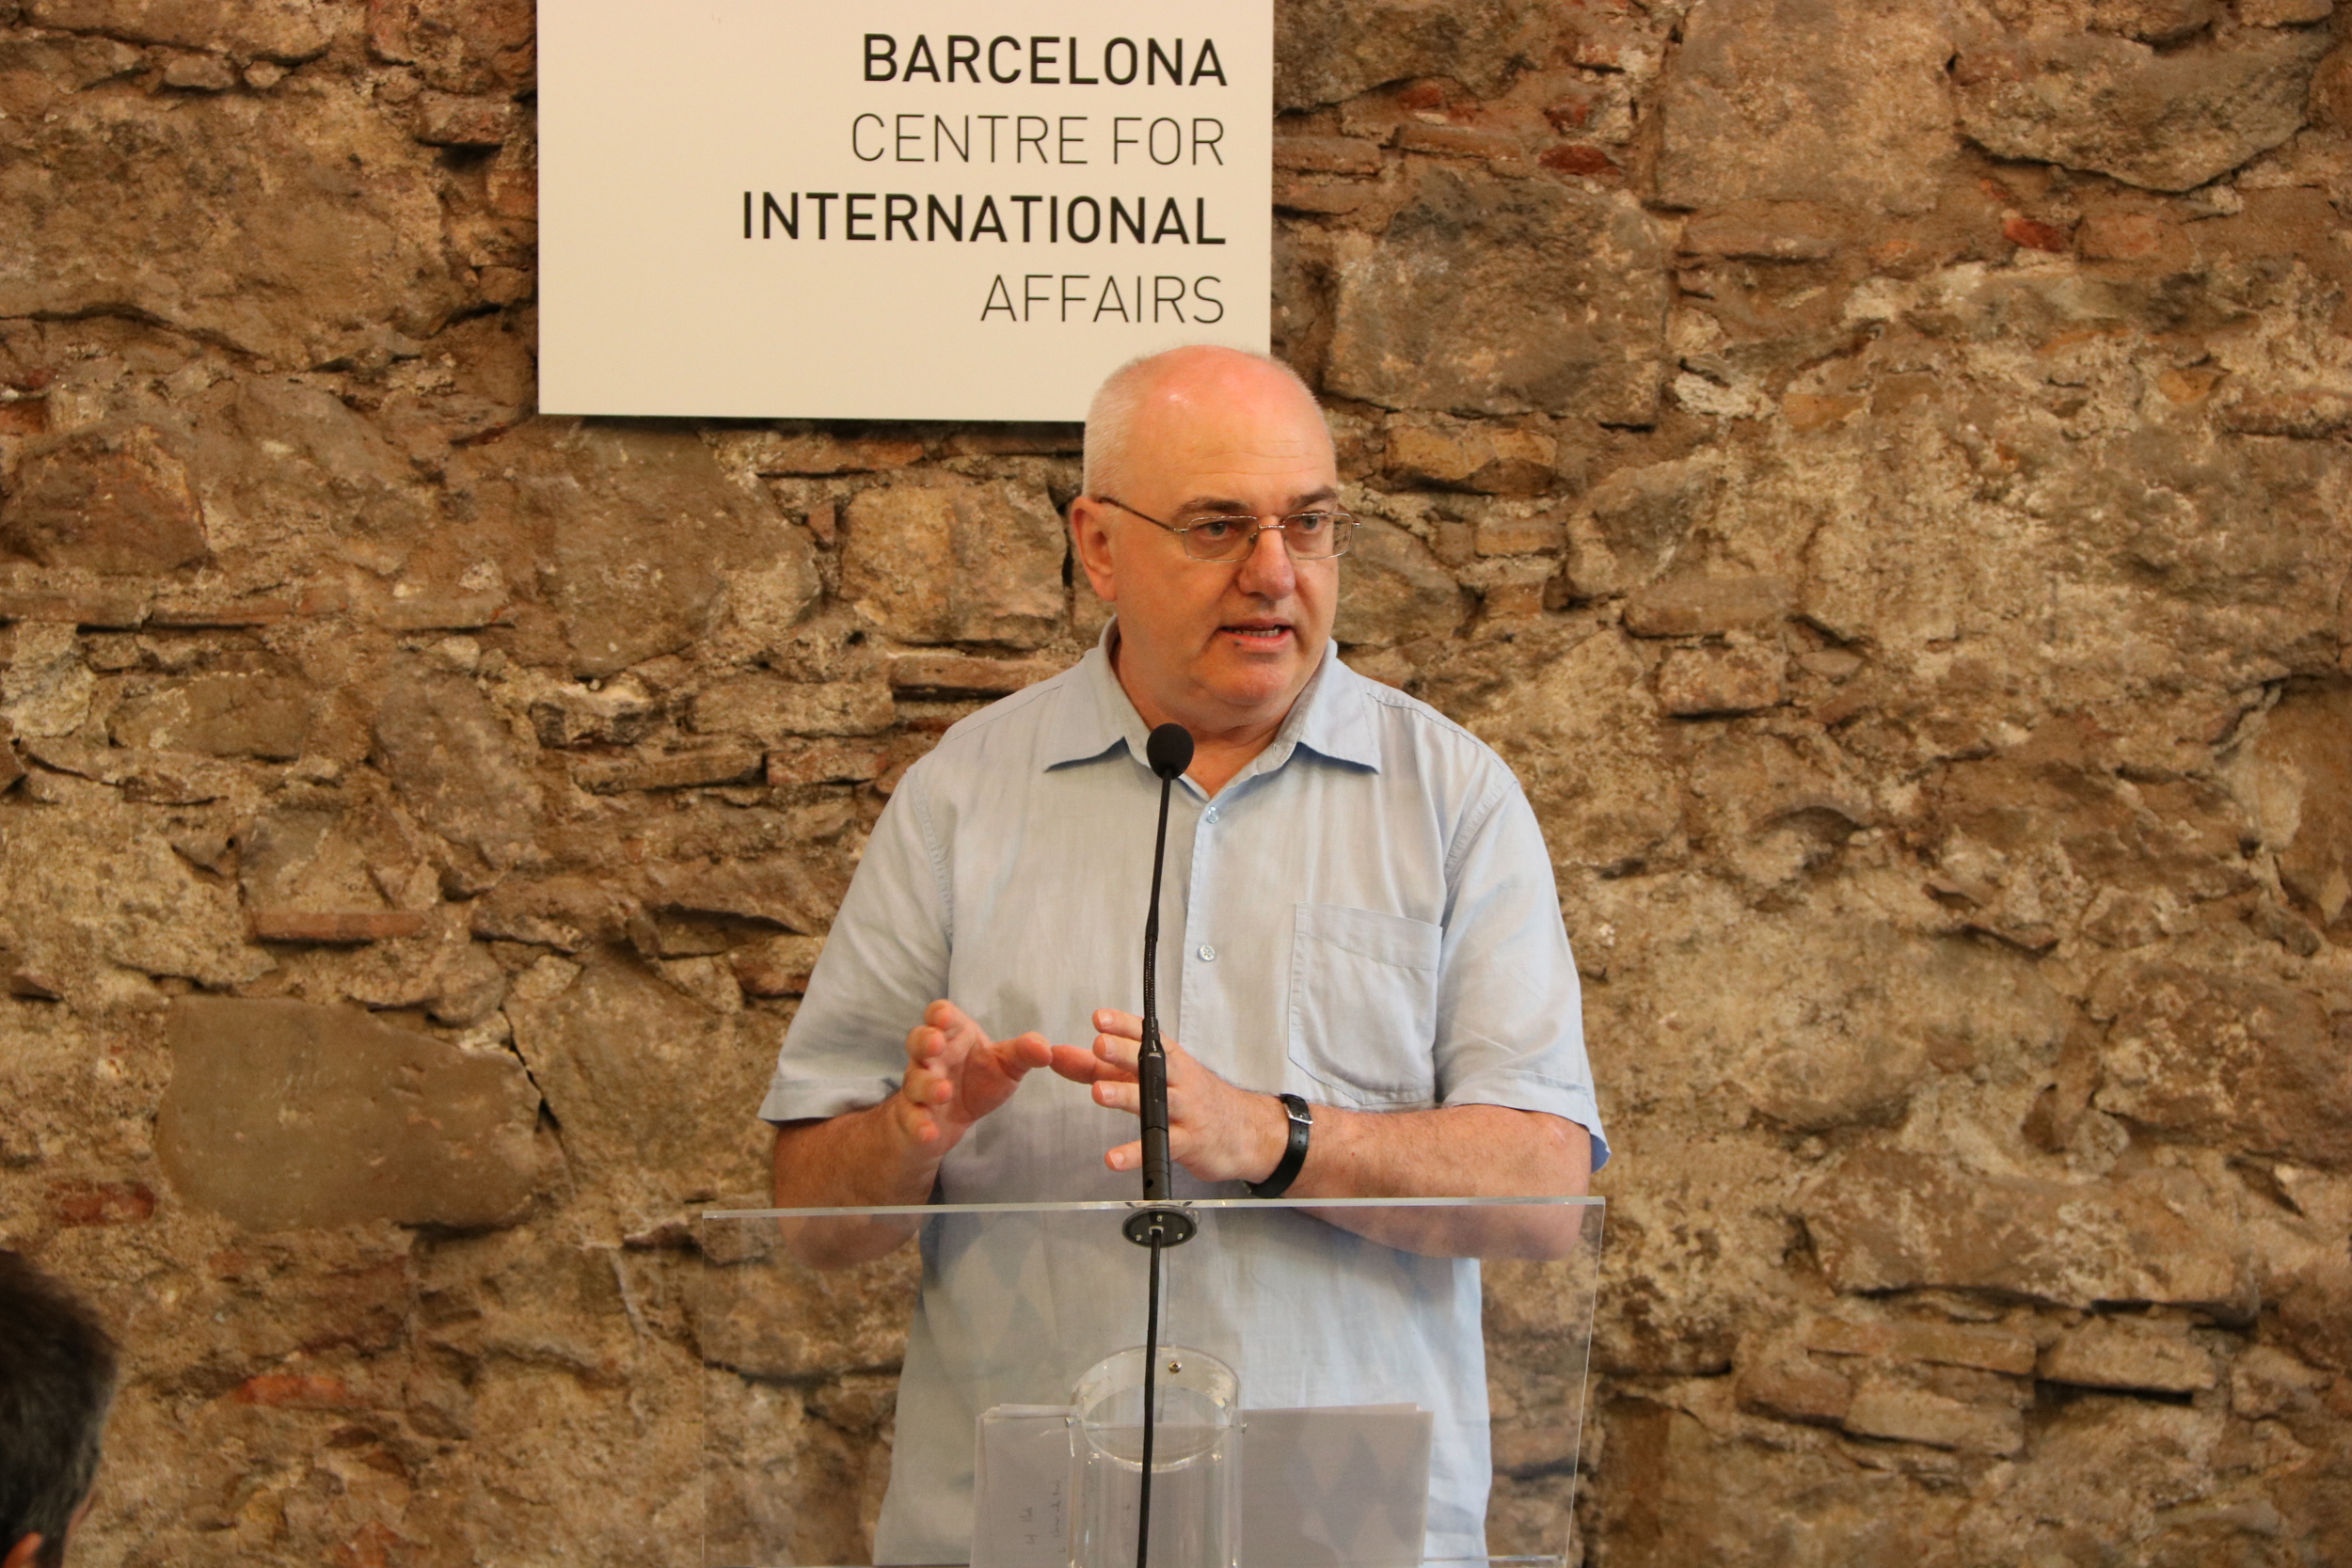 Dominic Keown during the conference in Barcelona 